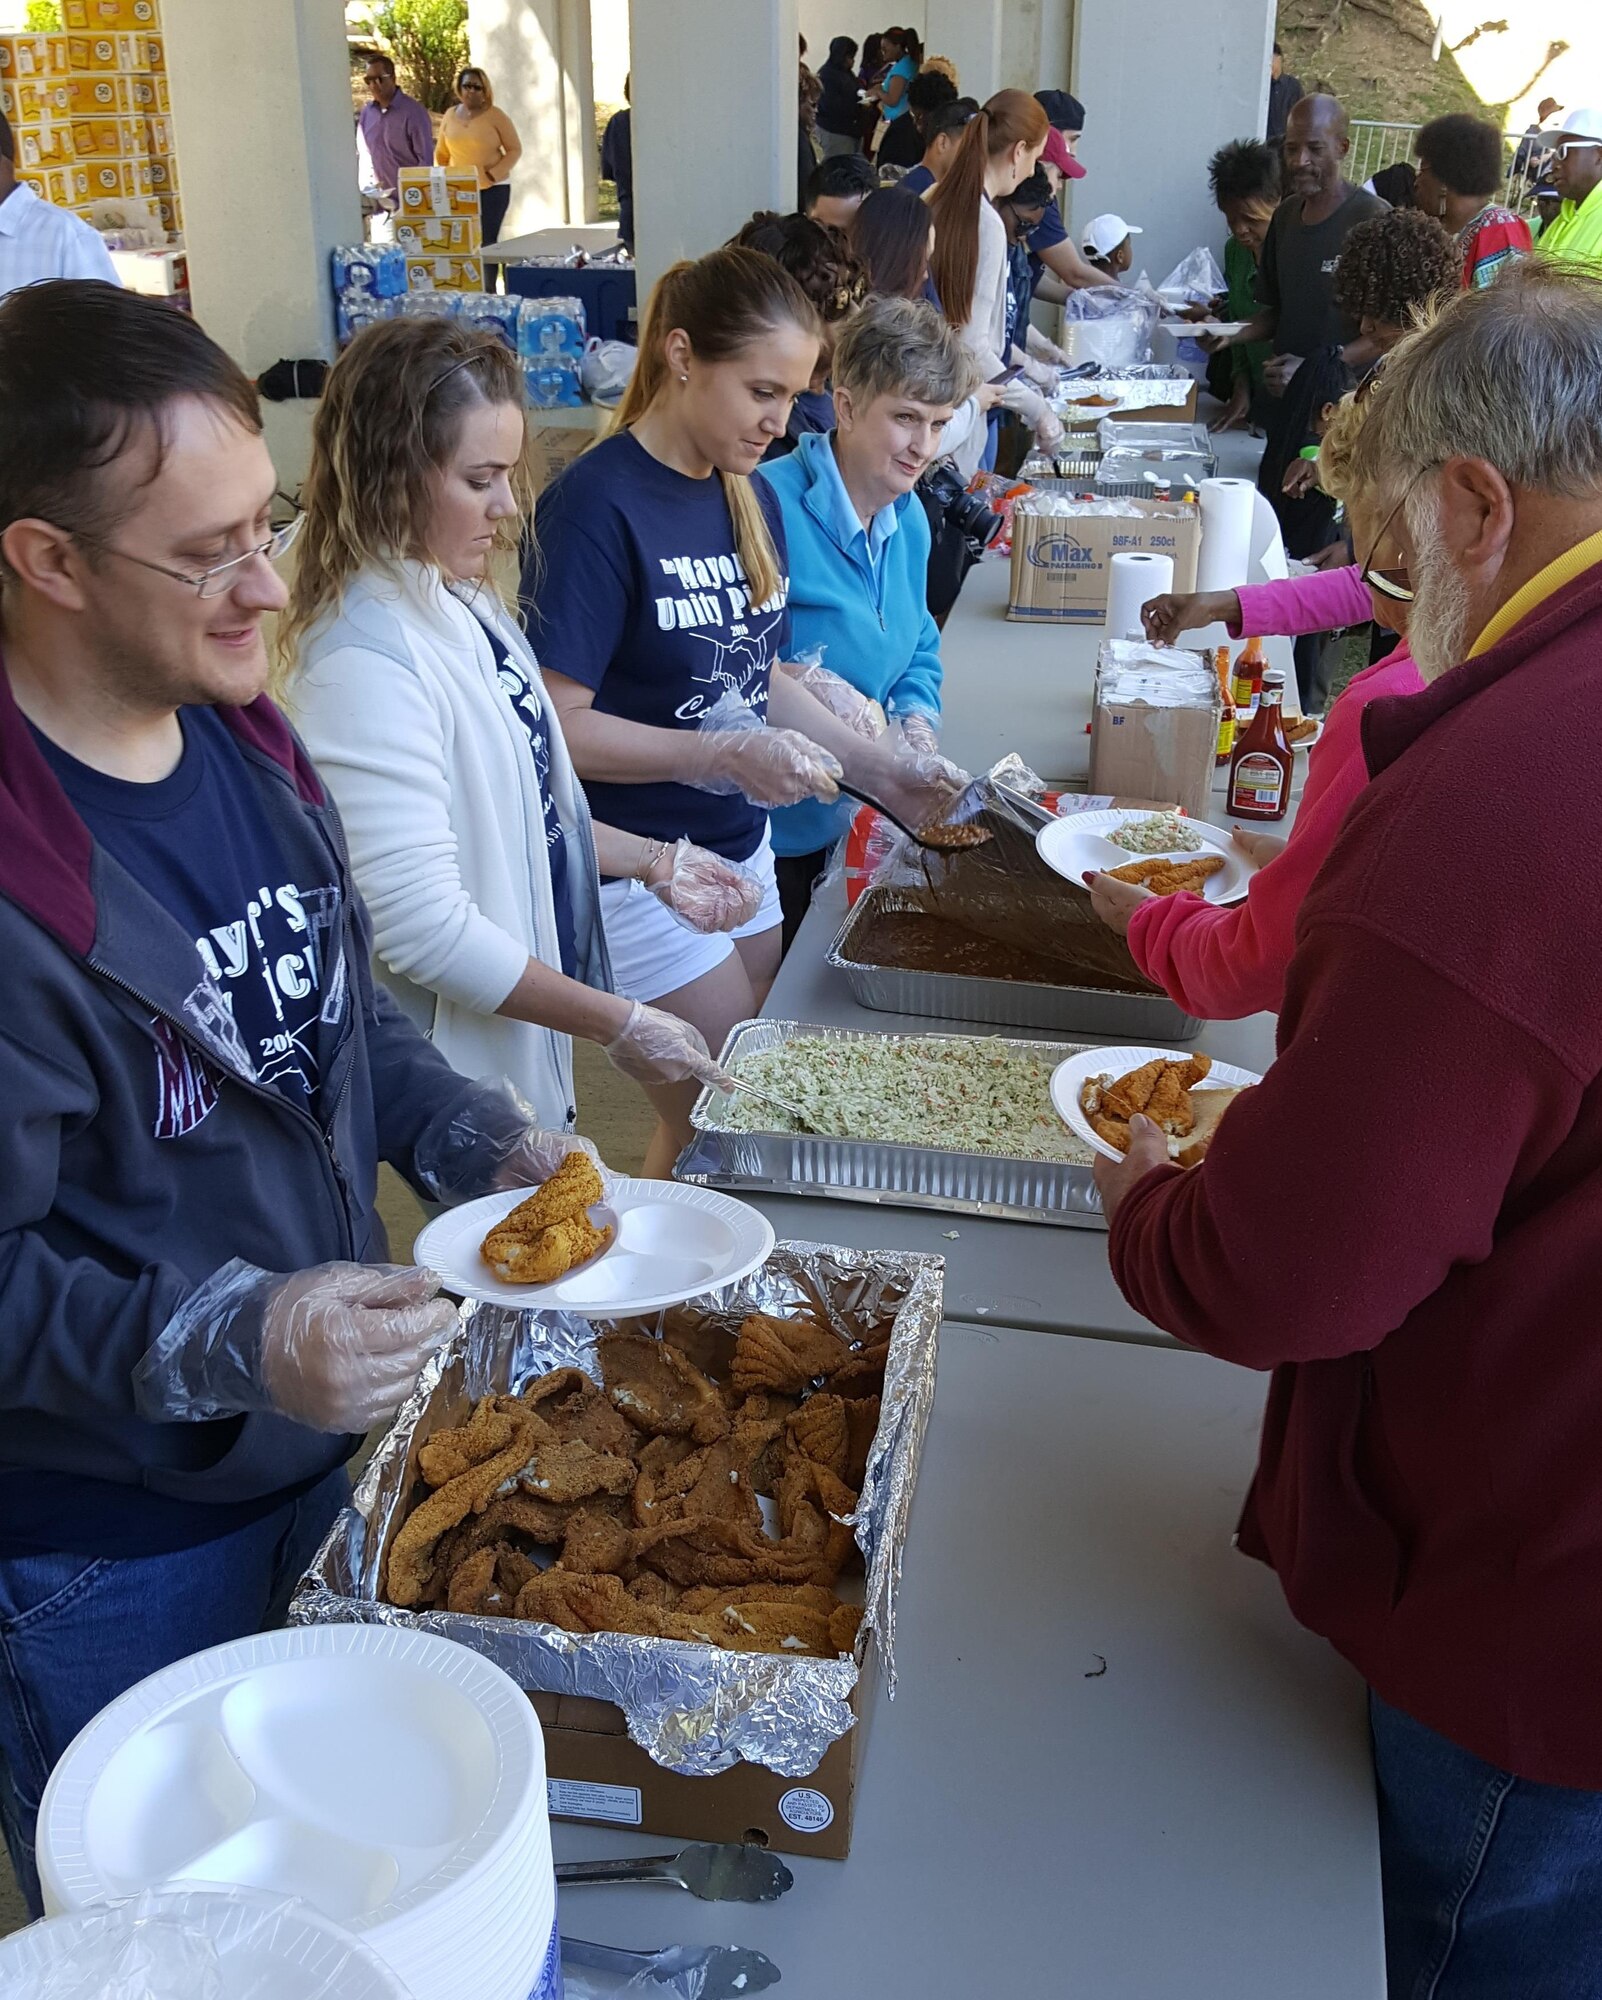 Airmen from Columbus Air Force Base serve fried catfish meals to members of the community April 2 at the Mayor’s Unity Picnic. Over 1,000 pounds of catfish was served to over 2,000 attendees. (Courtesy photo/Vanessa Brown)